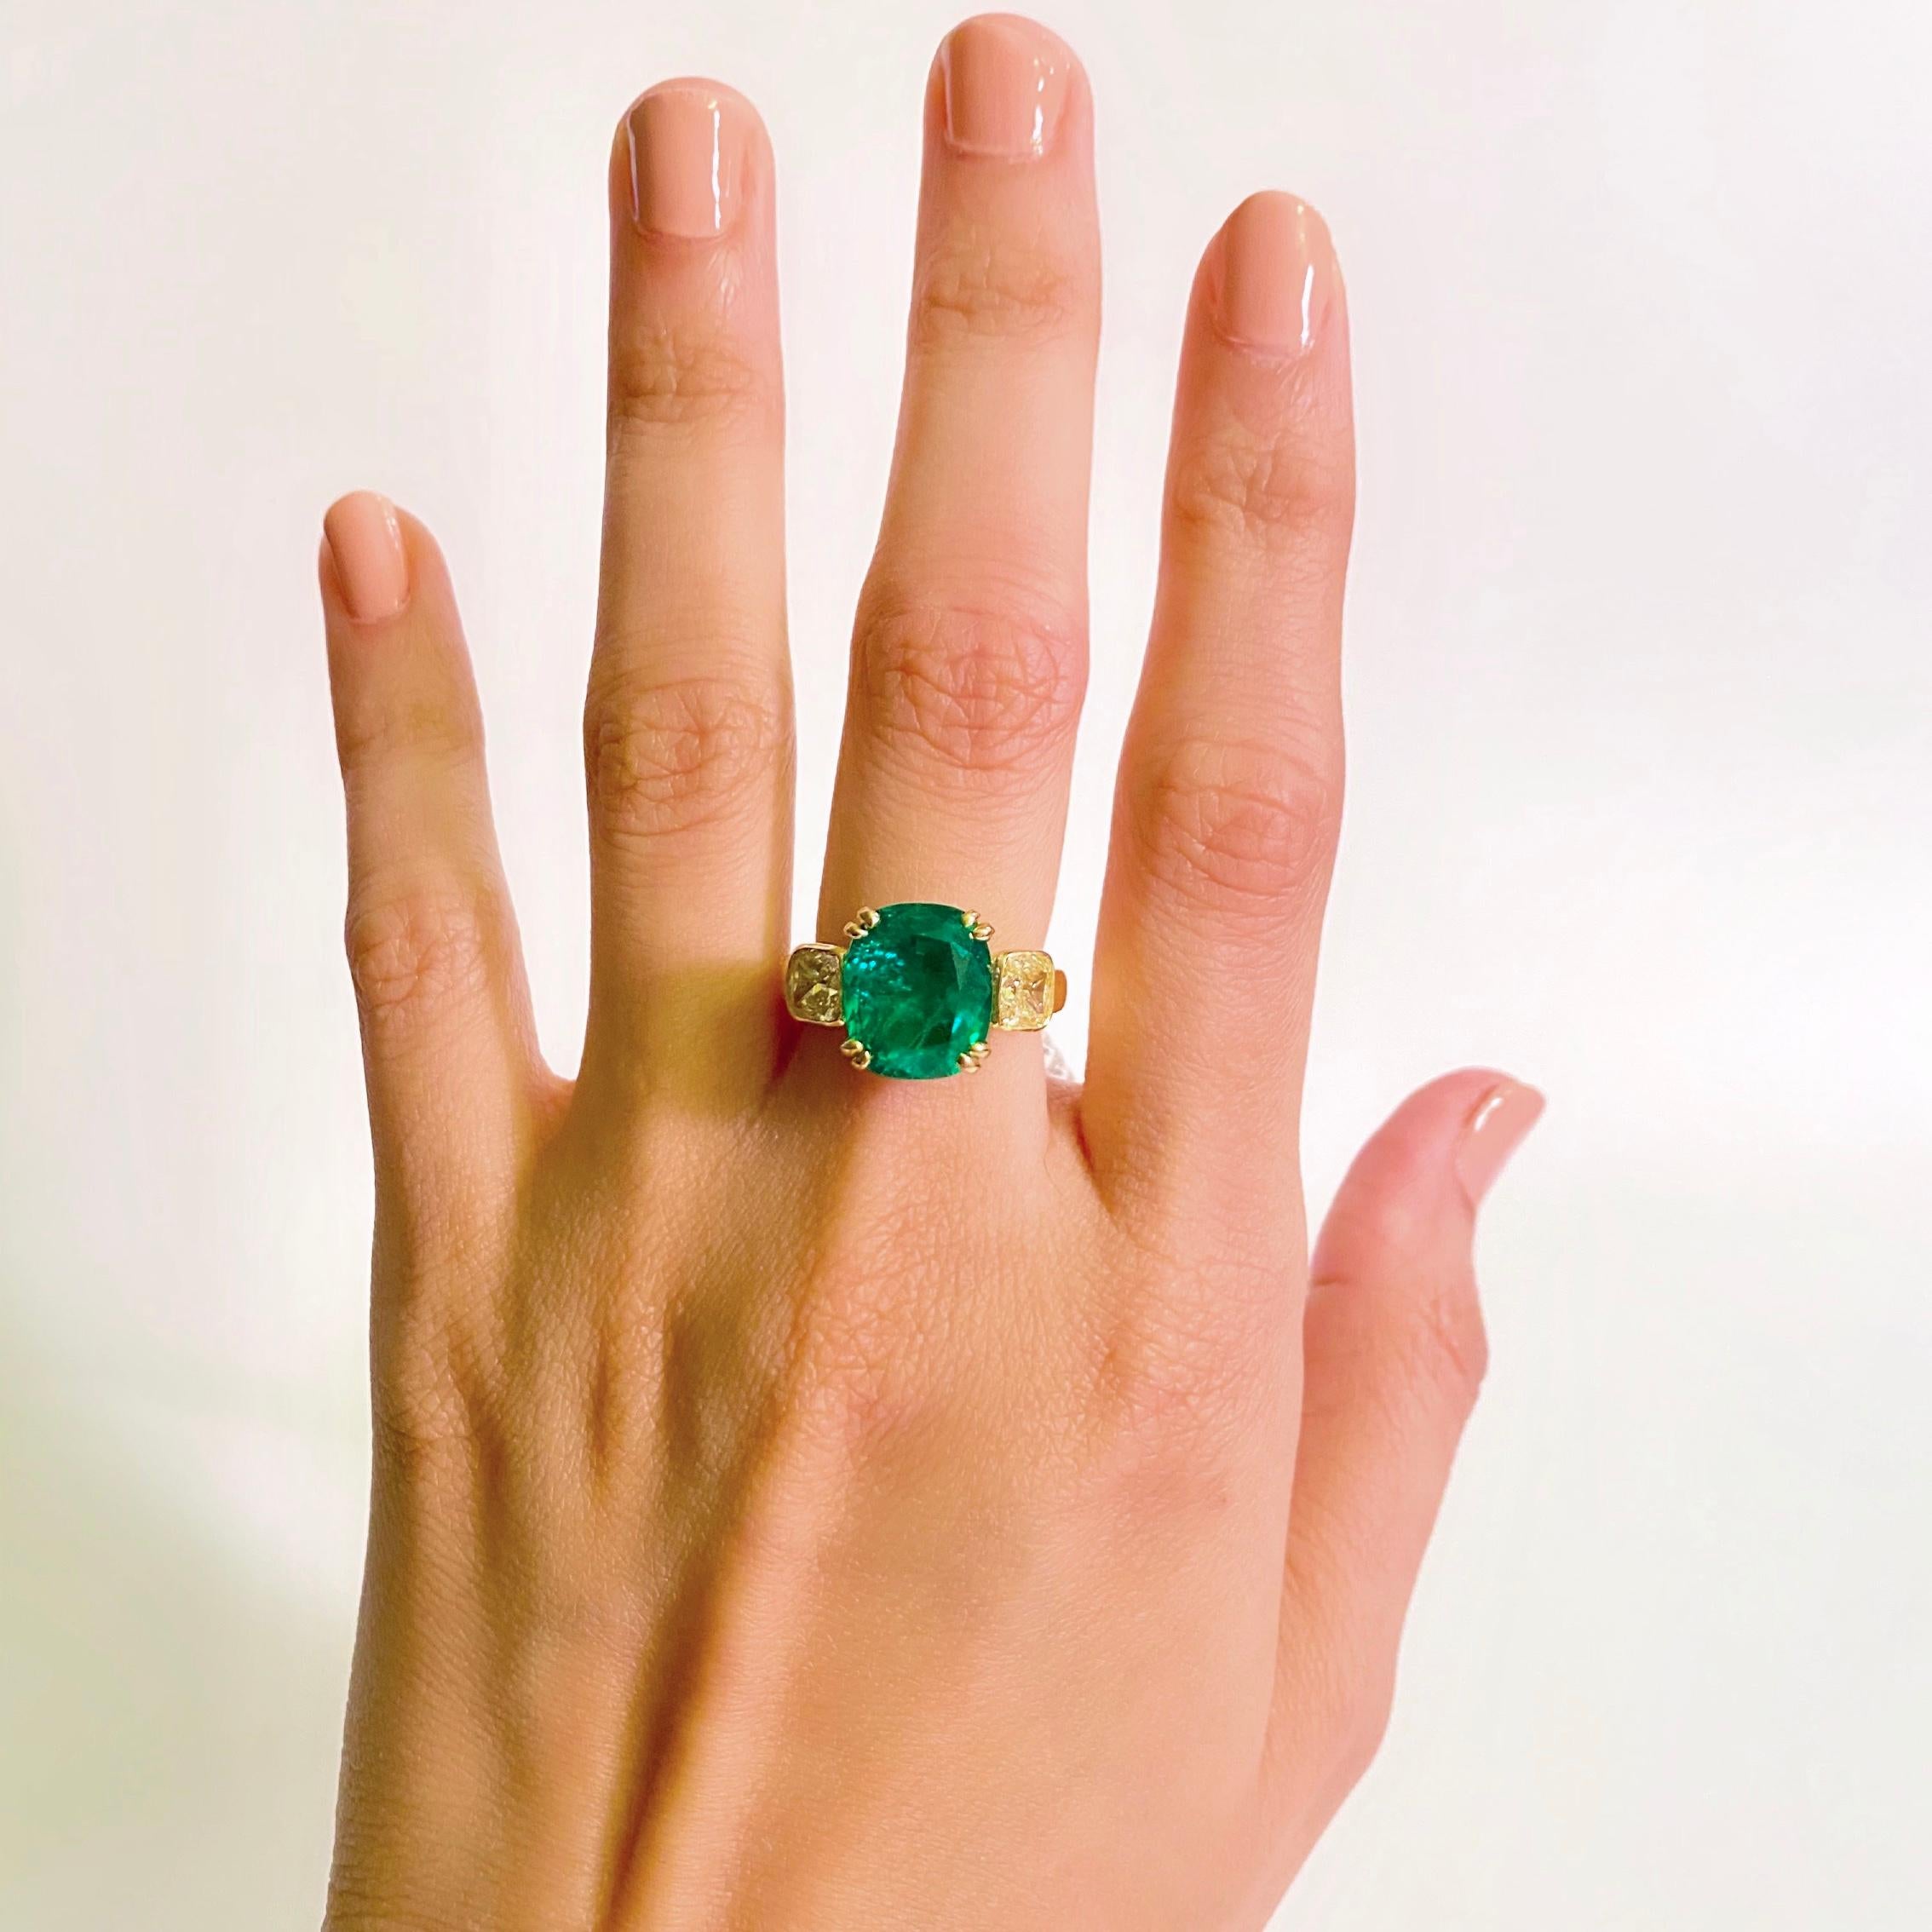 The Emerald features a natural Ethiopian emerald of a vibrant green hue and a slight yellow overtone, set in an 18K yellow gold mounting. This emerald is complemented by a pair of matching fancy yellow diamonds. 

Gemstone Details
Natural Ethiopian